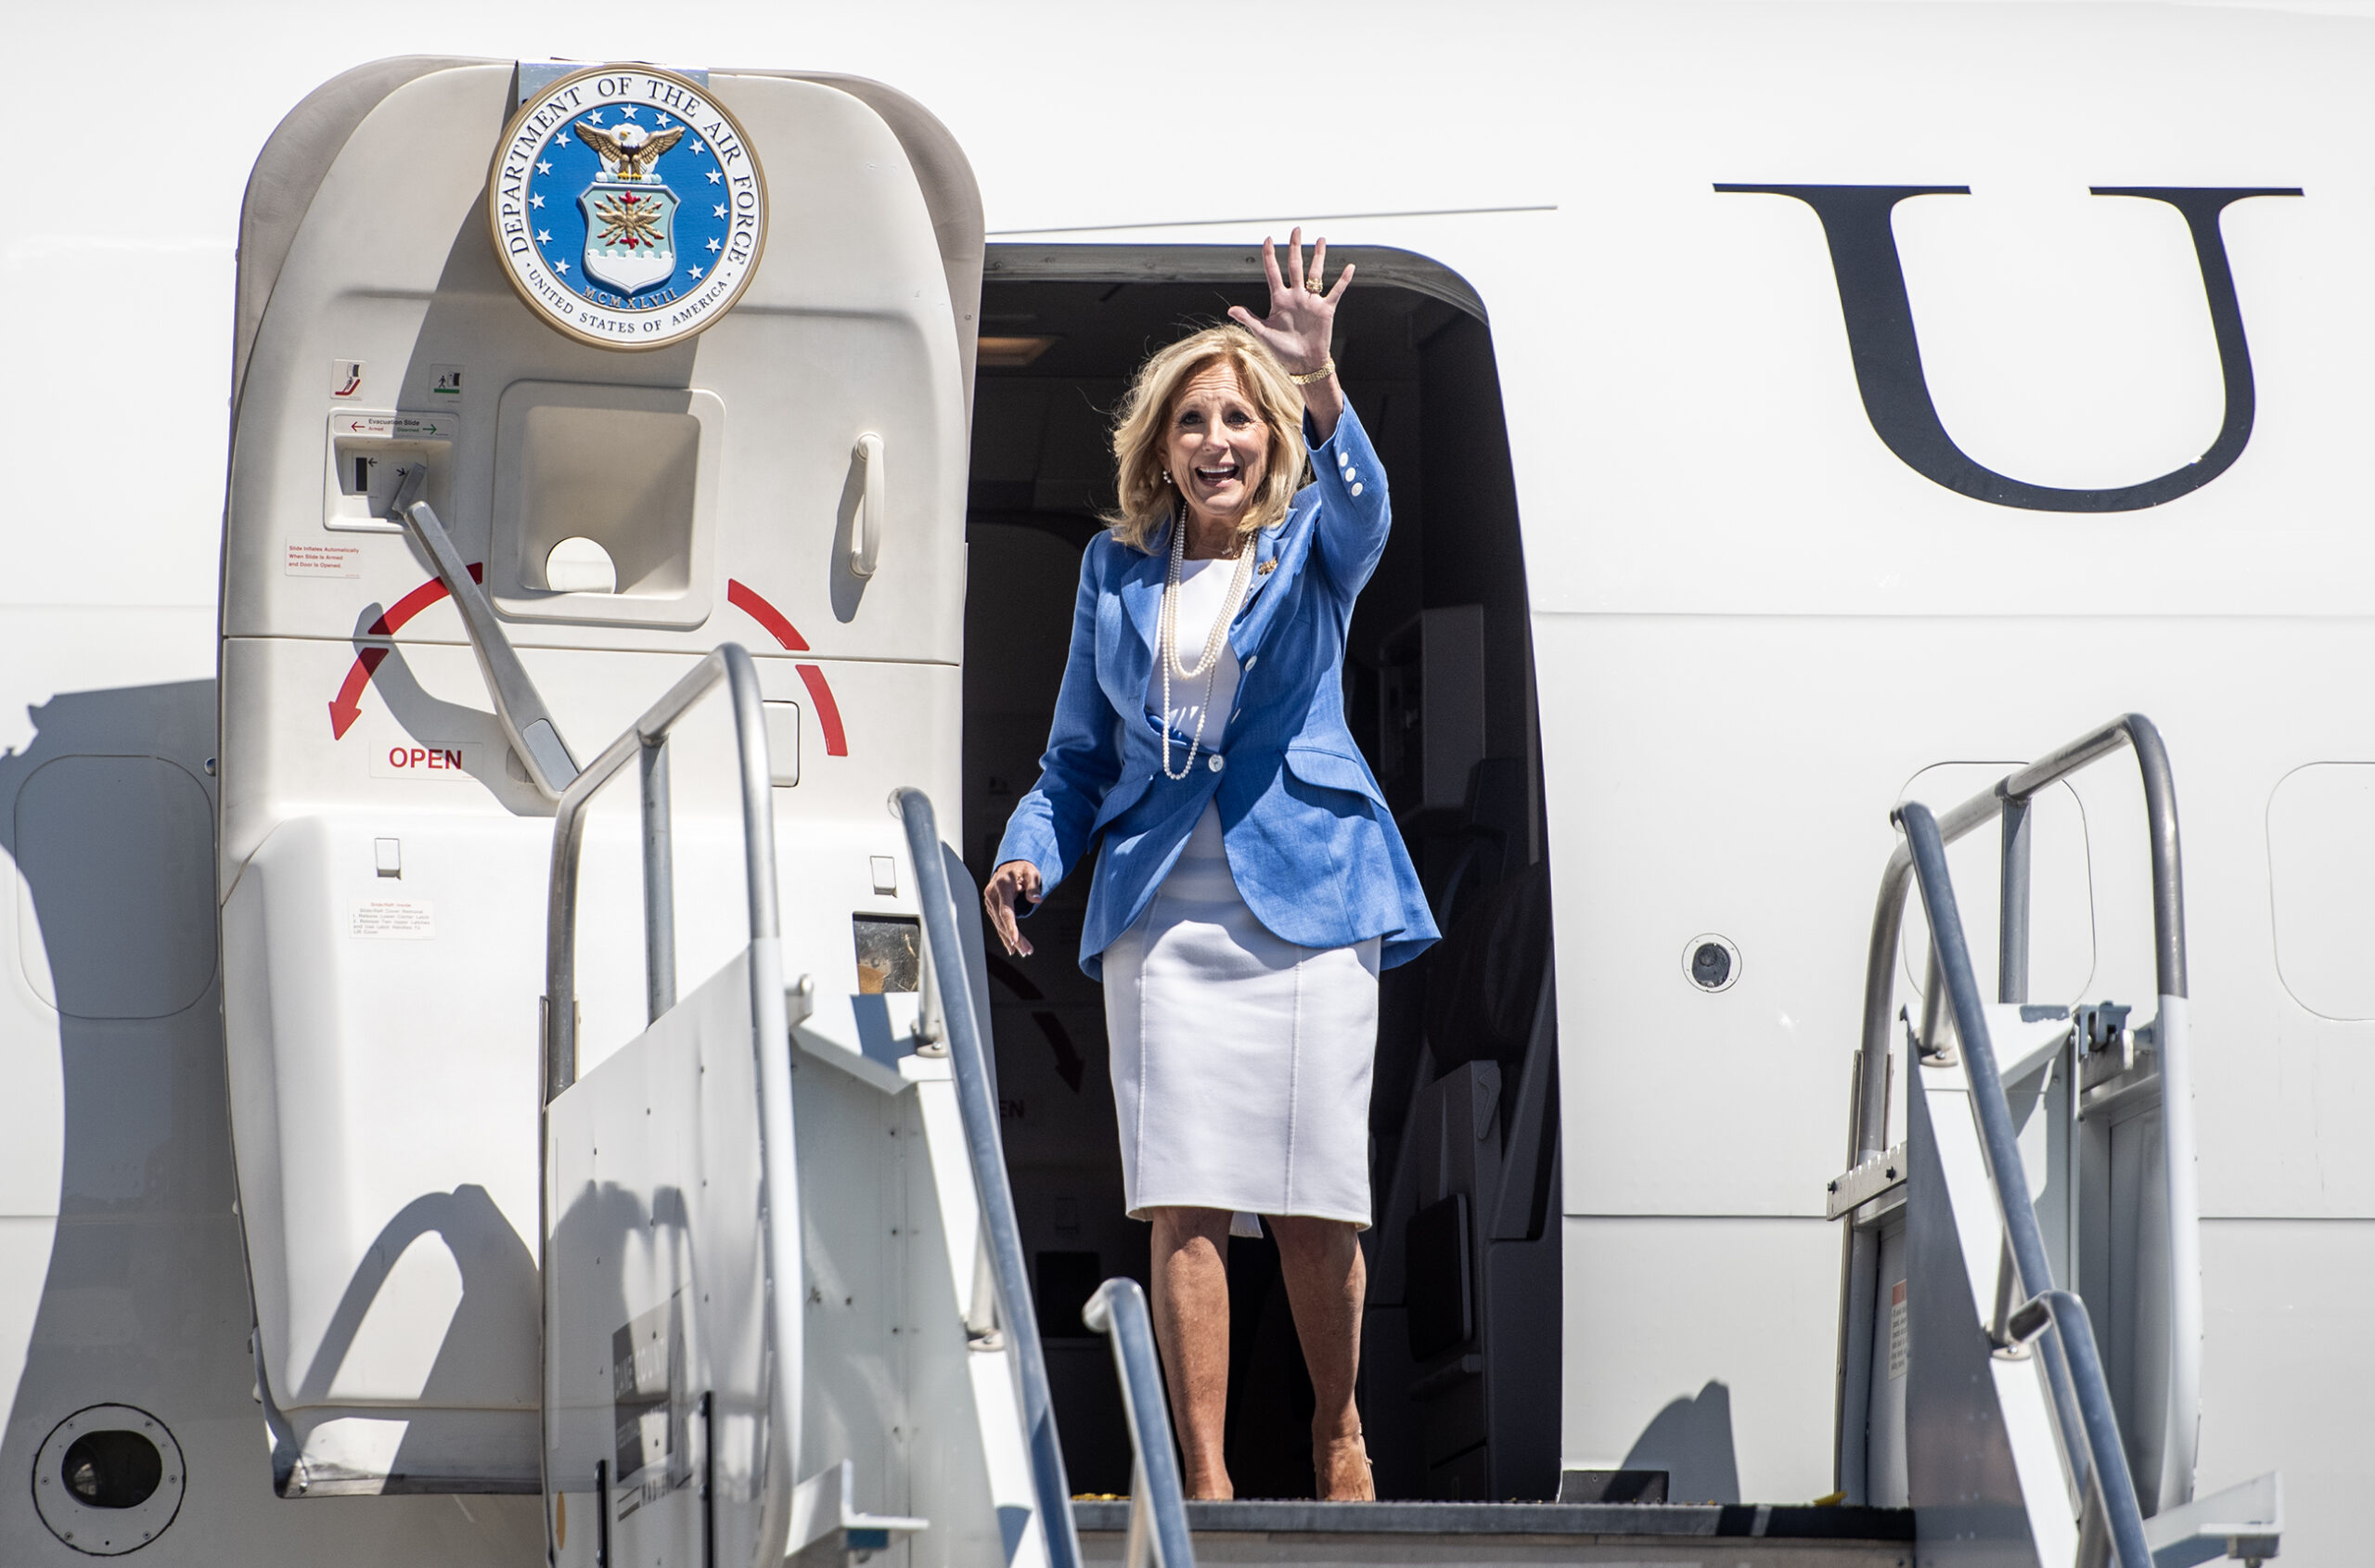 First Lady Jill Biden promotes cancer screenings, public education in Madison visit